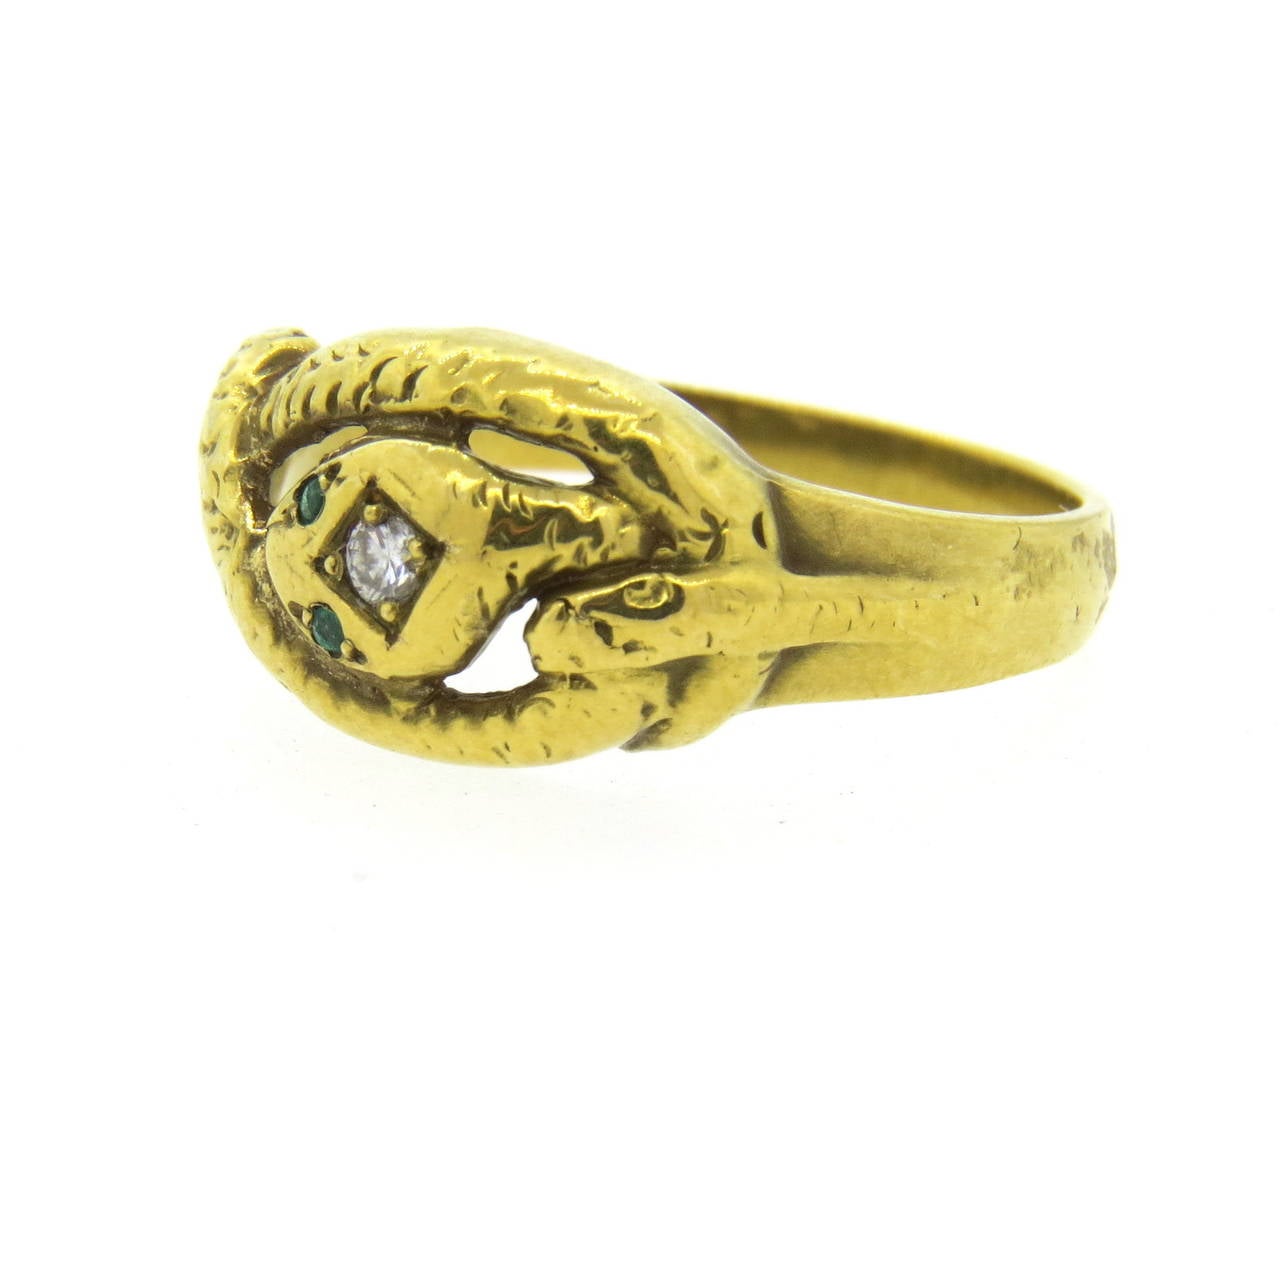 Victorian 14k gold ring, featuring snake , decorated with a diamond and emerald eyes. Ring is a size 9 1/2, ring top is 10.3mm wide. Weight of the piece - 4.7 grams